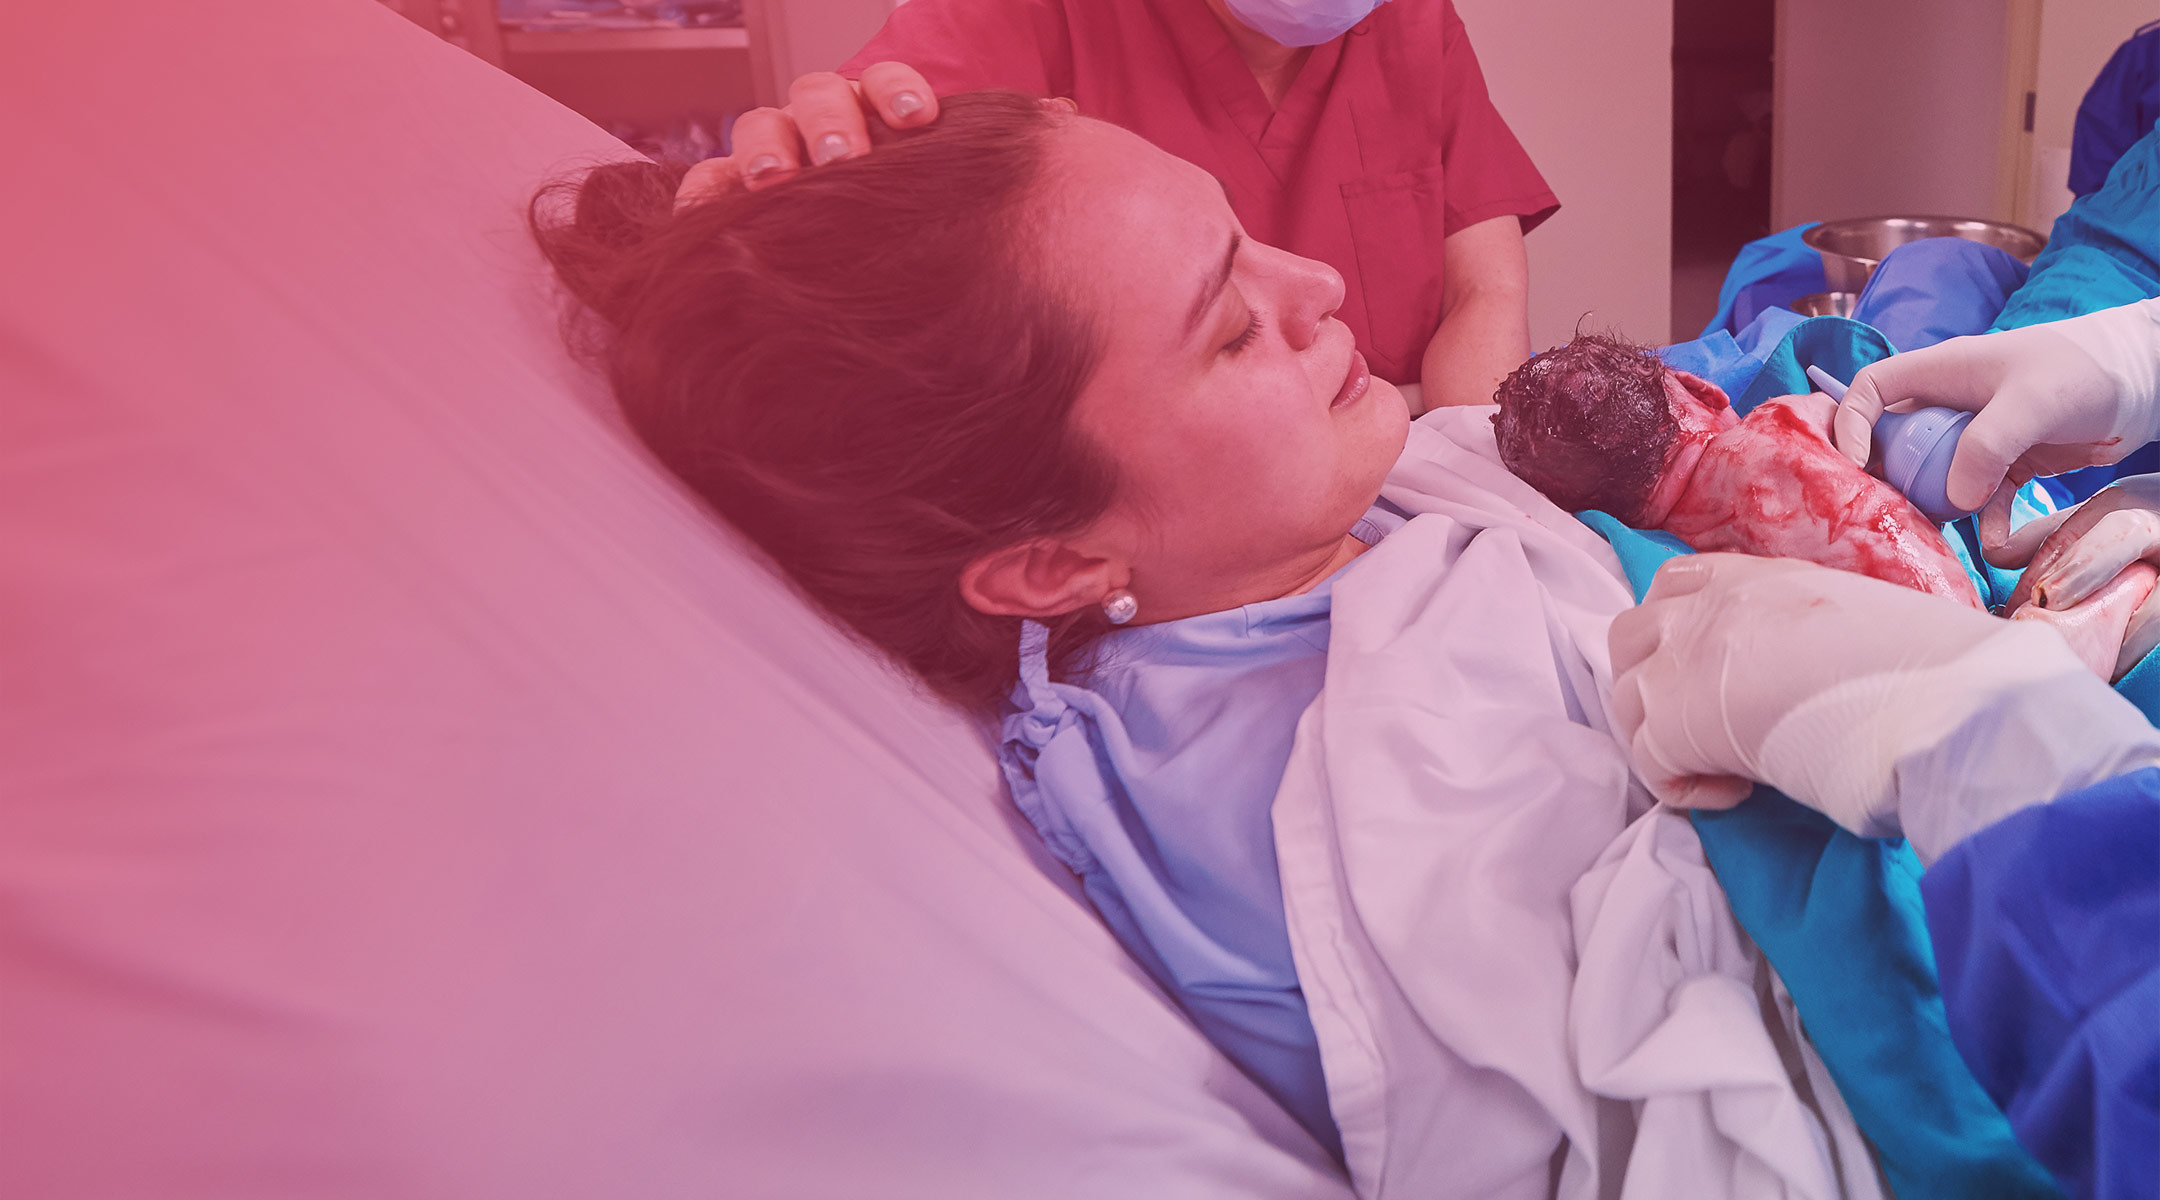 mom delivering baby through c-section